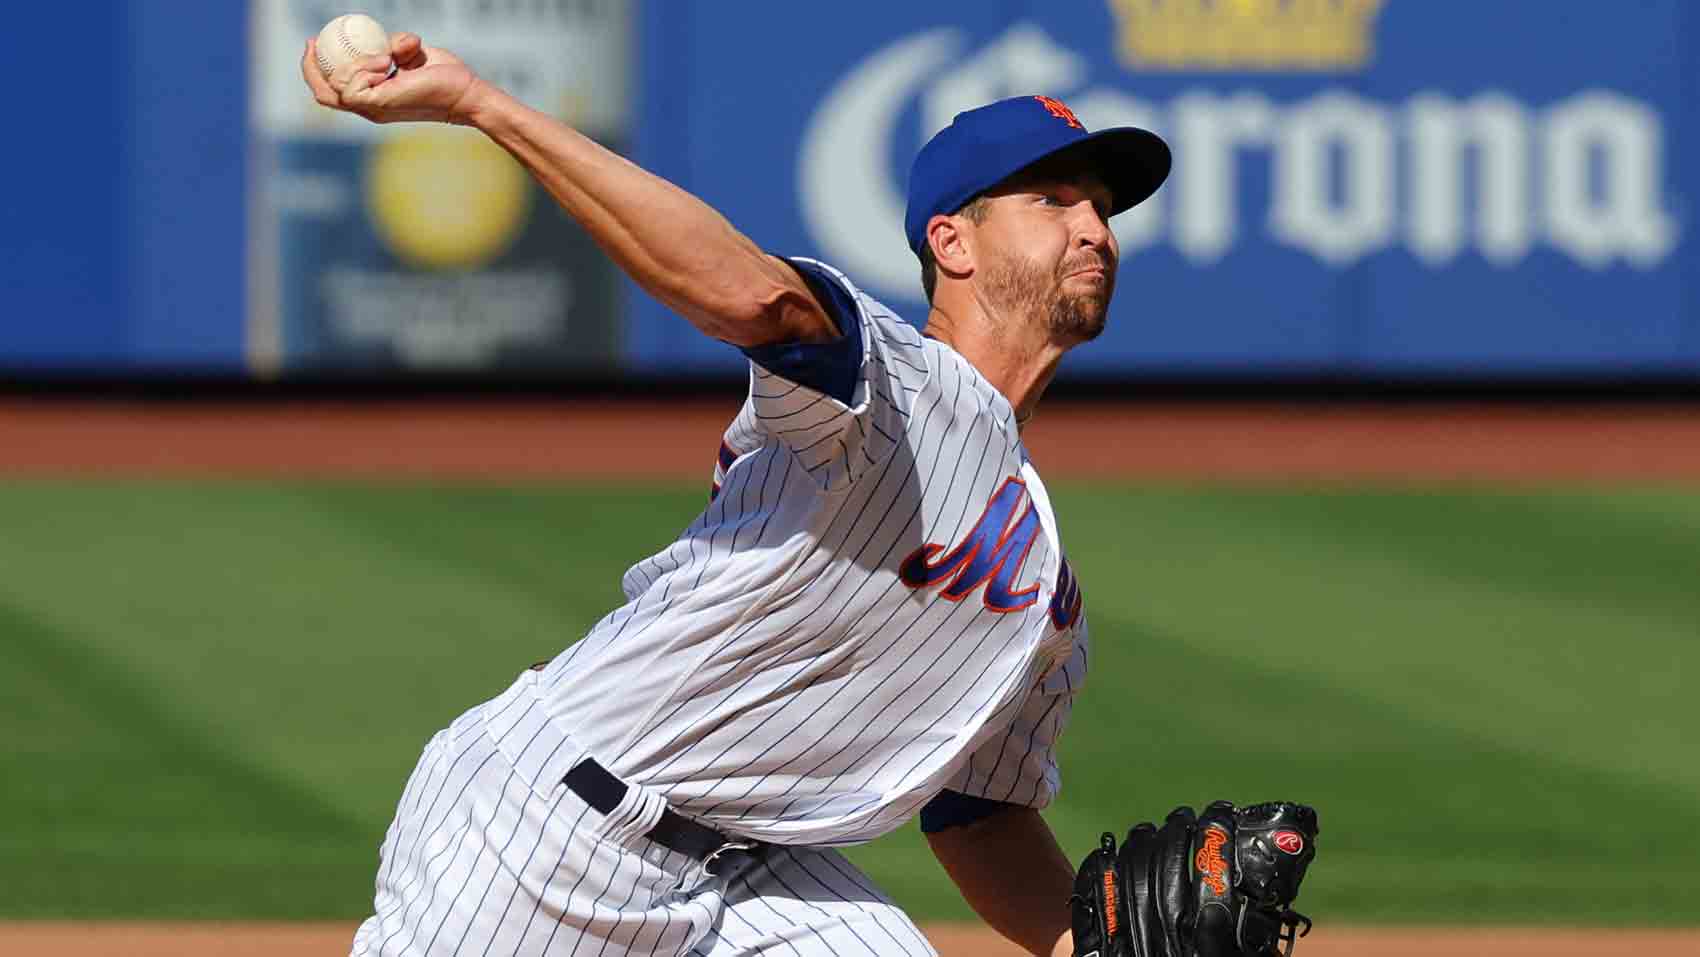 DeGrom Shuts Out the Nationals and Sets a Strikeout Record - The